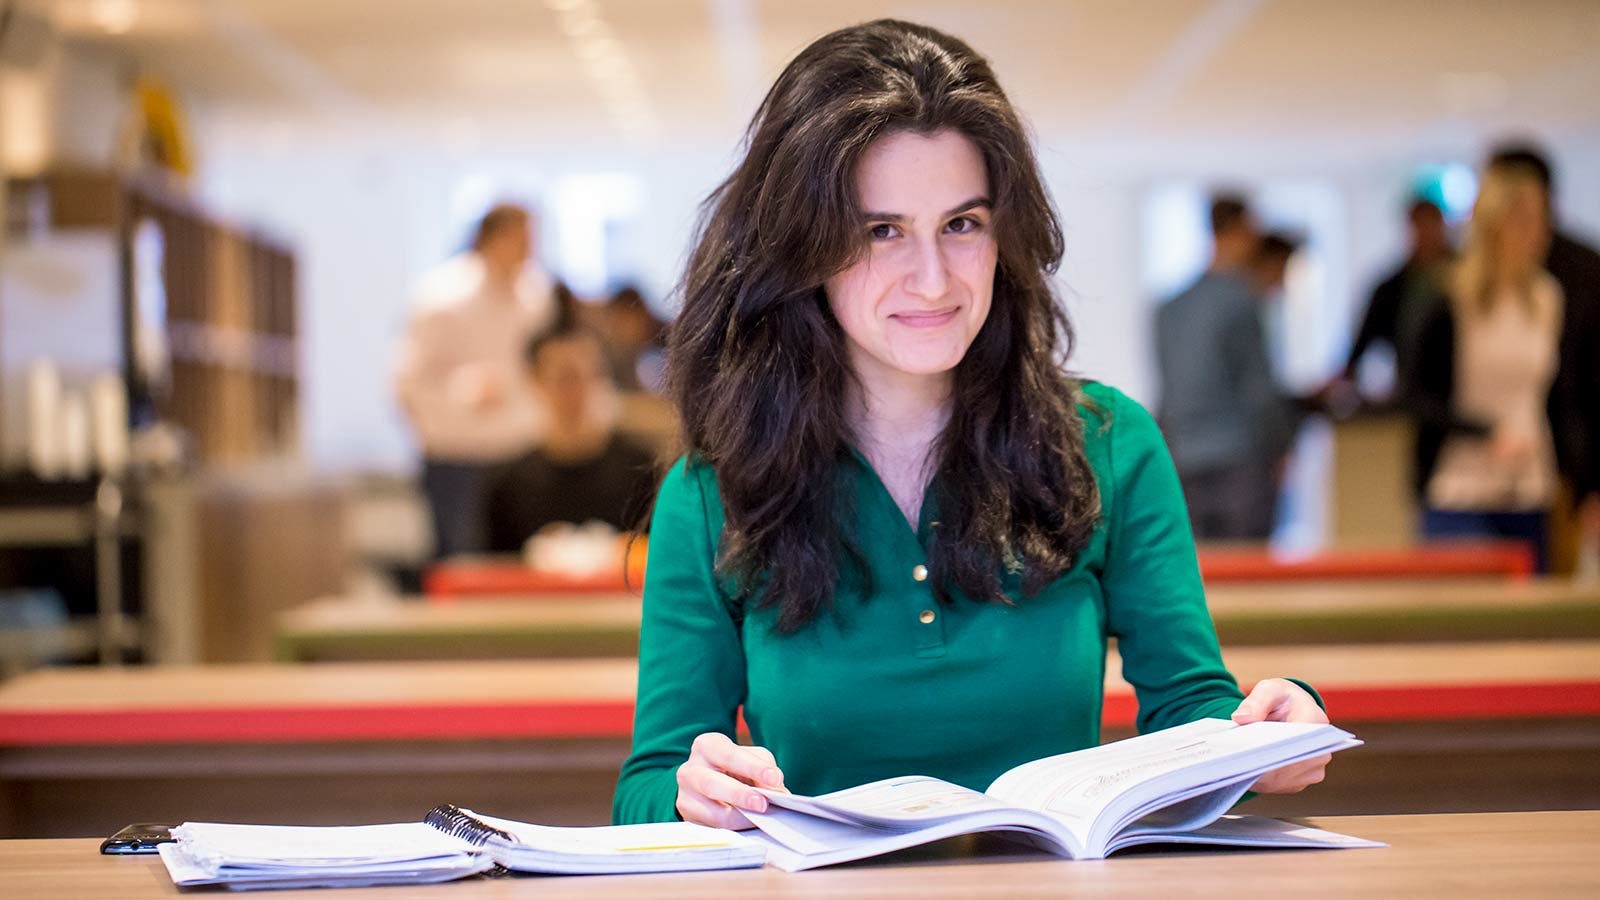 Student flipping through book and smiling at camera